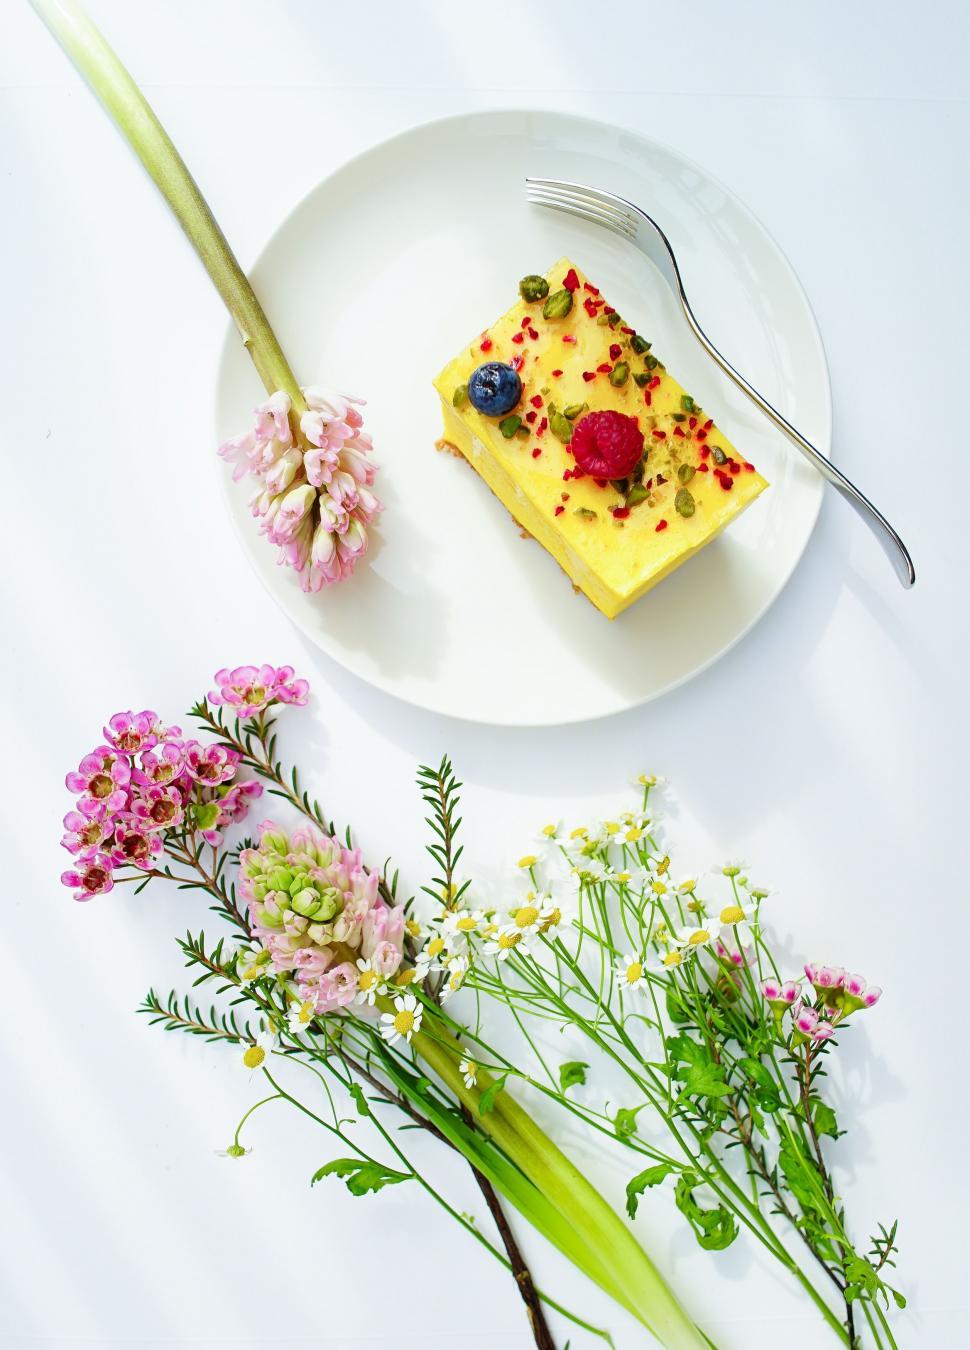 Free Image of White Plate With Cake and Flowers 